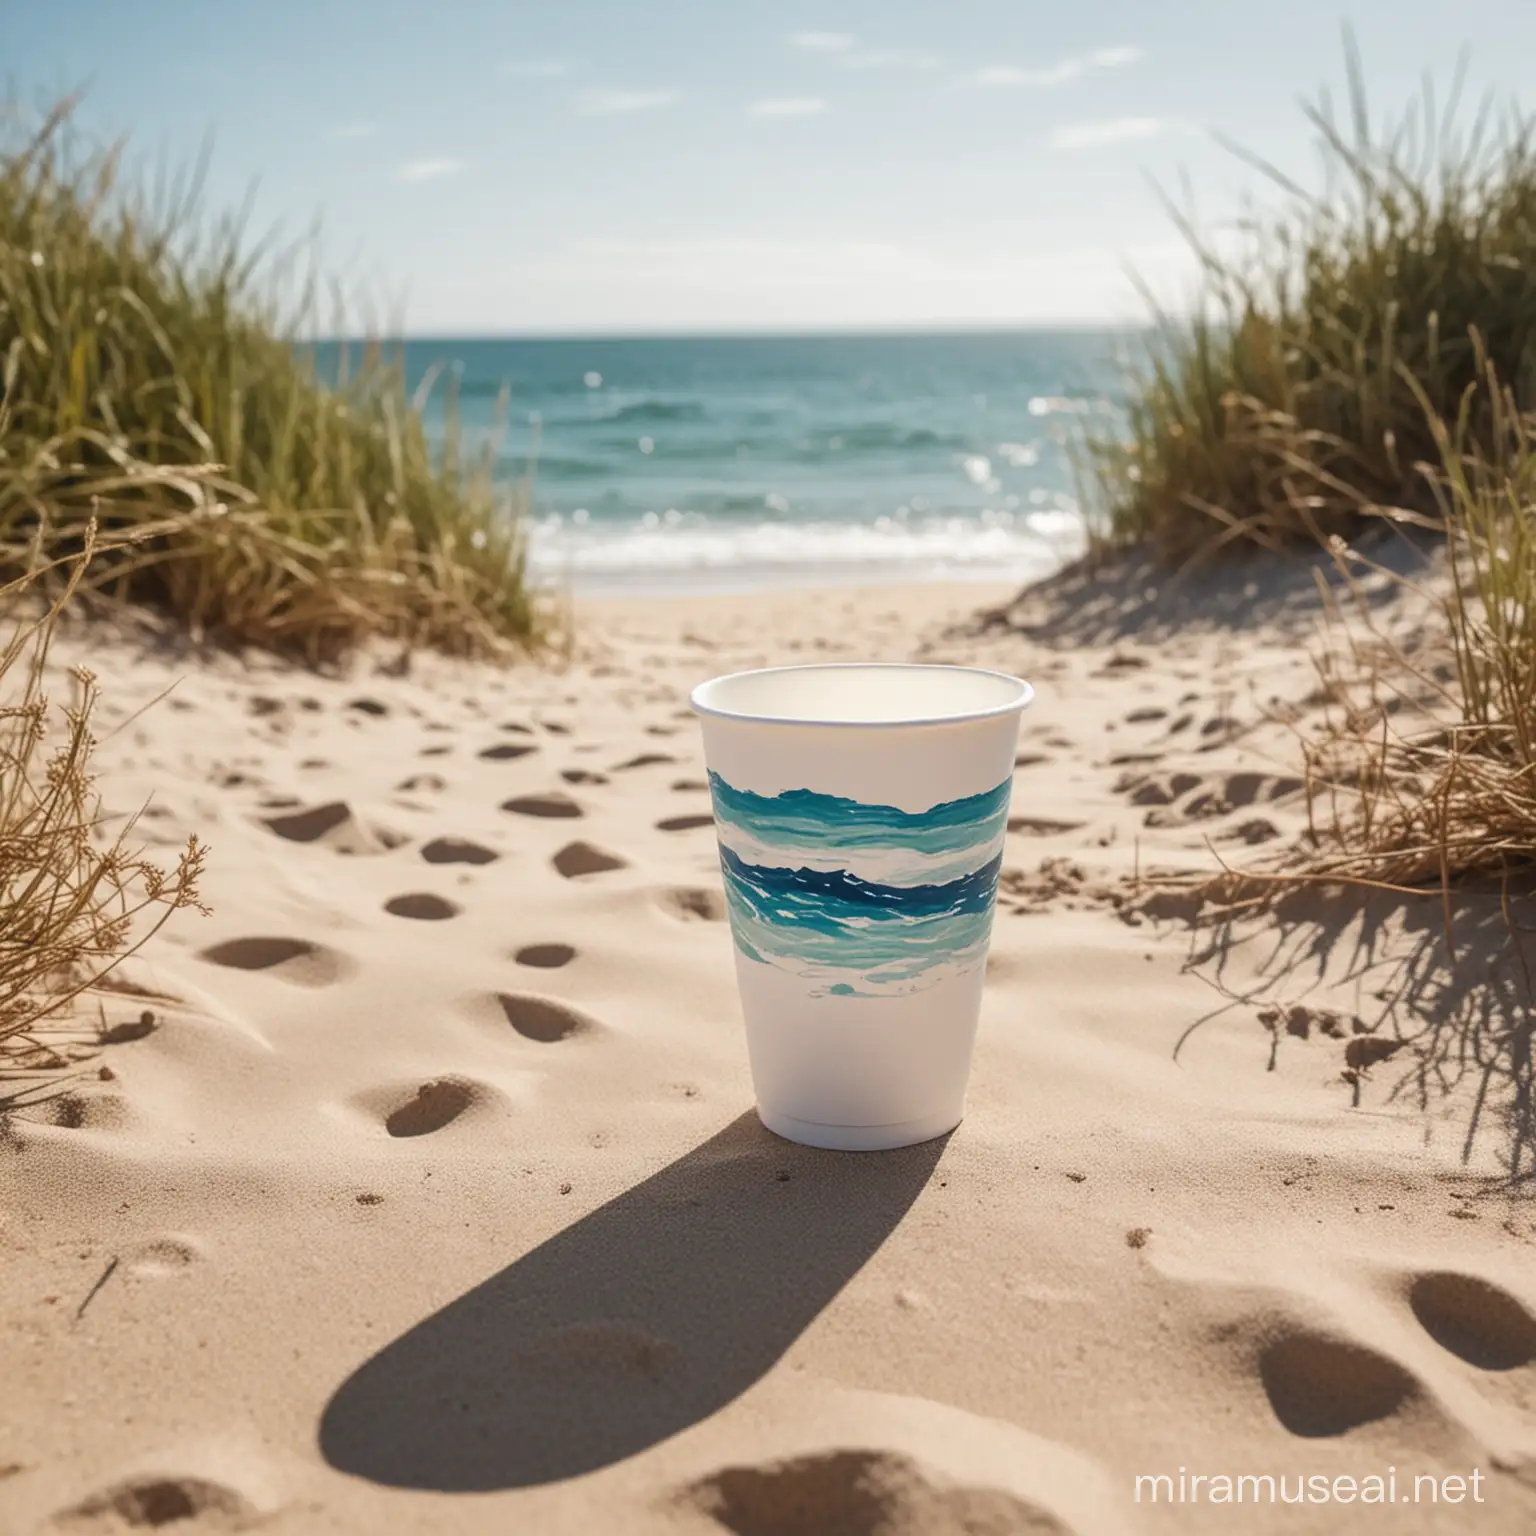 Party scene coastal with white paper cup